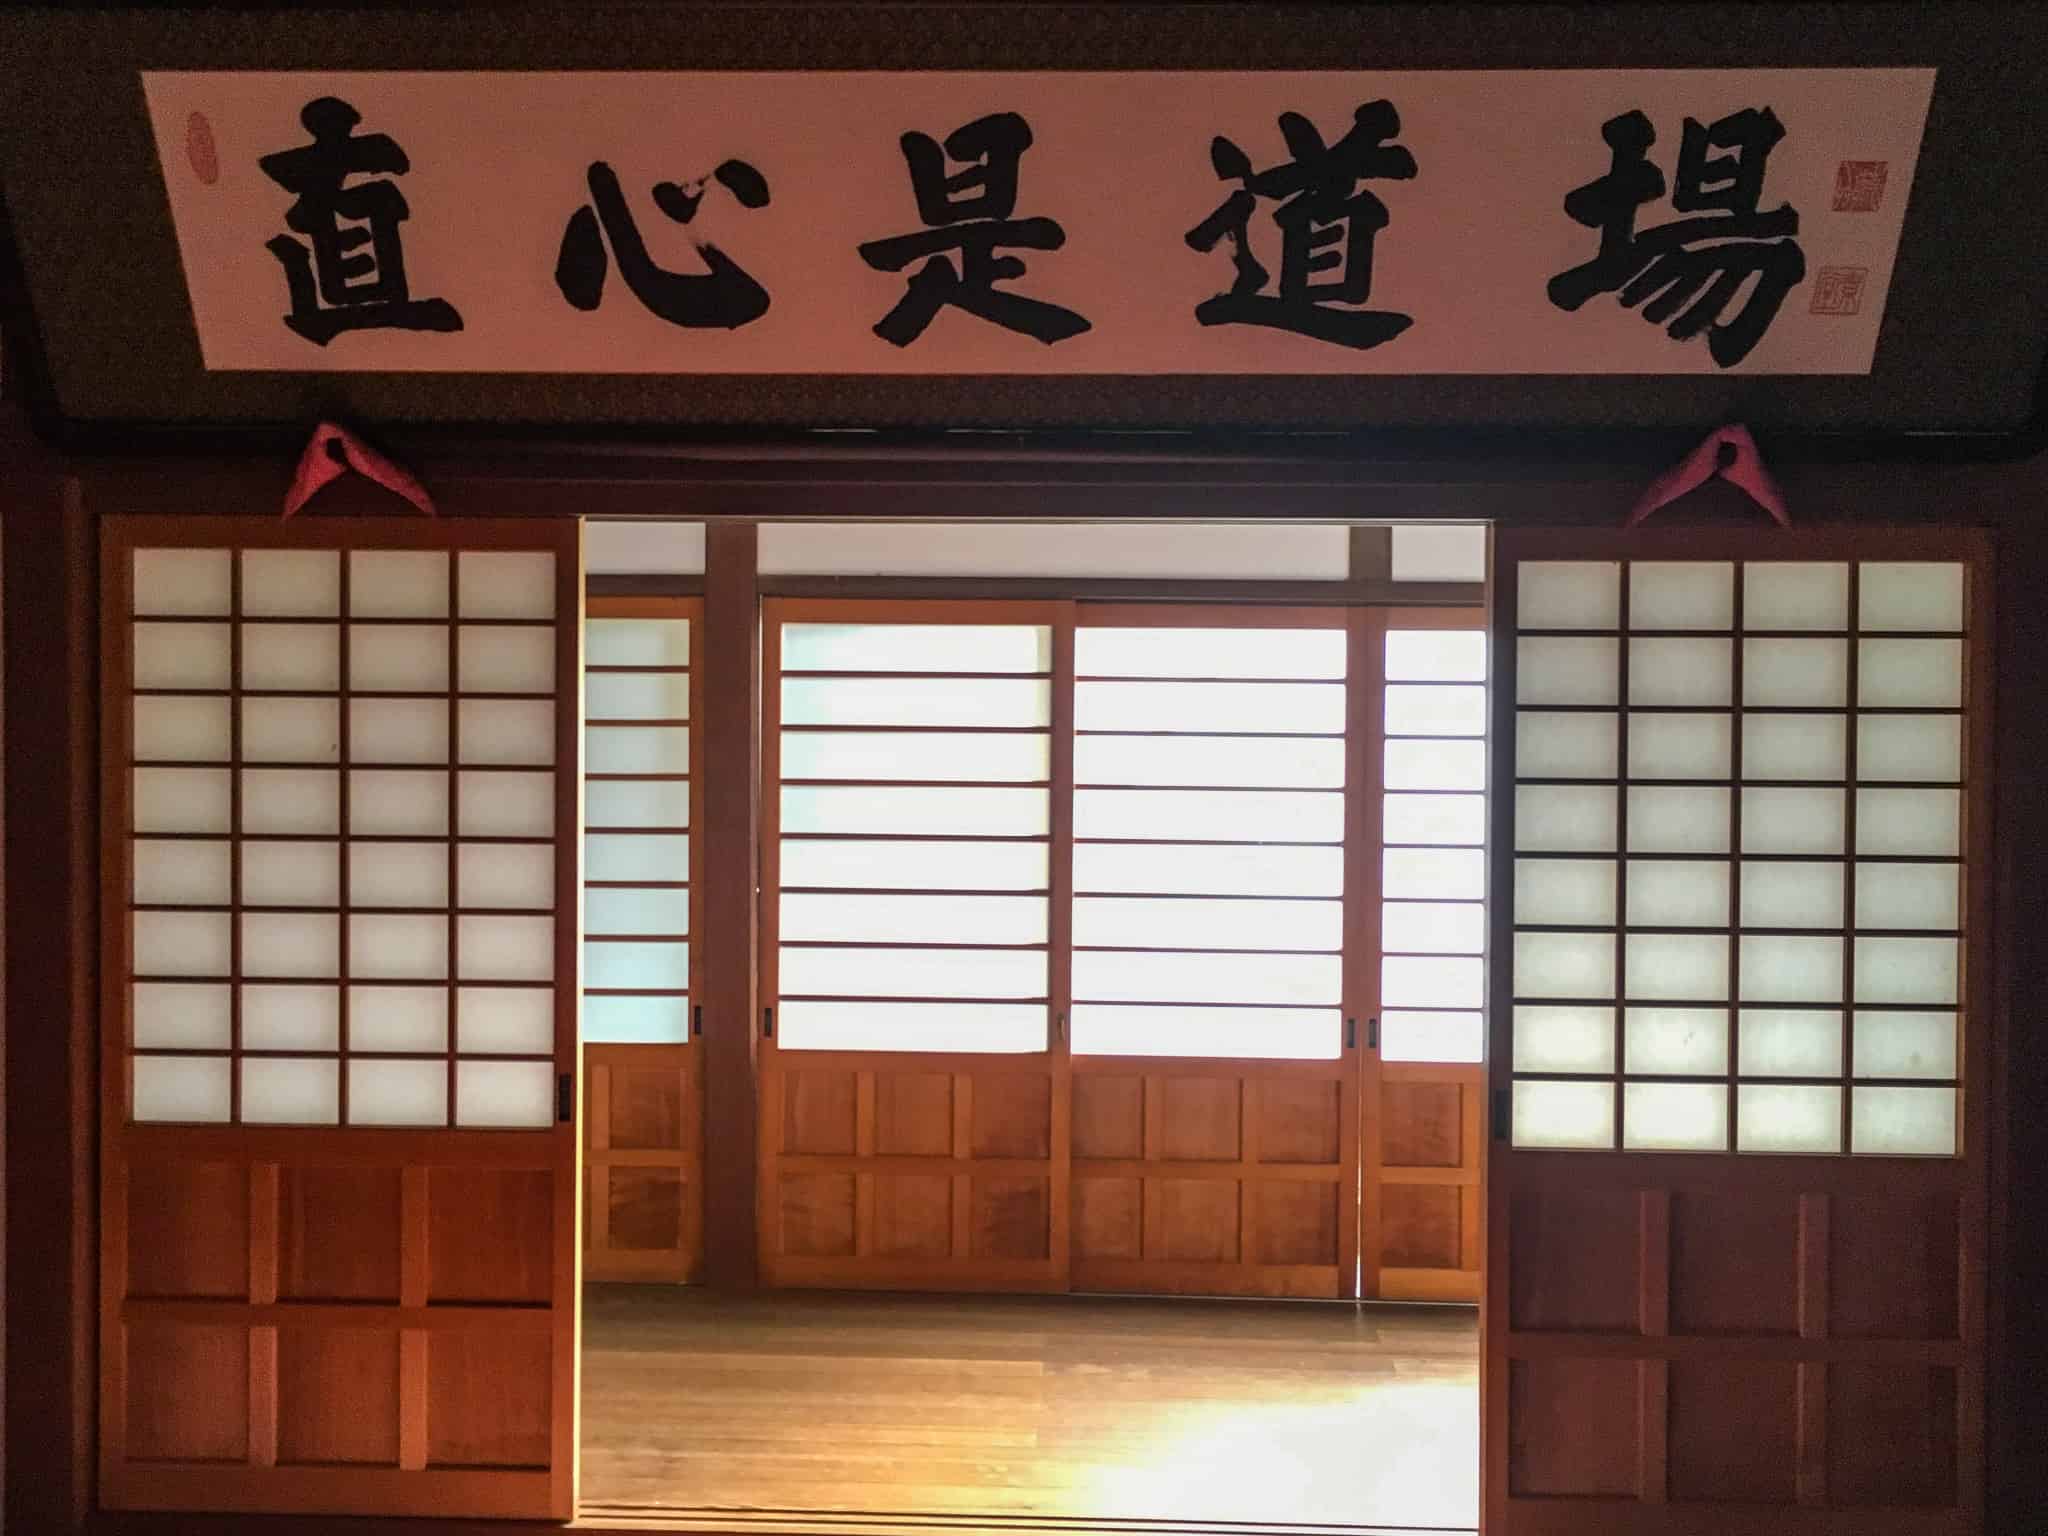 Inside the beautiful temple with it's mino washi paper doors